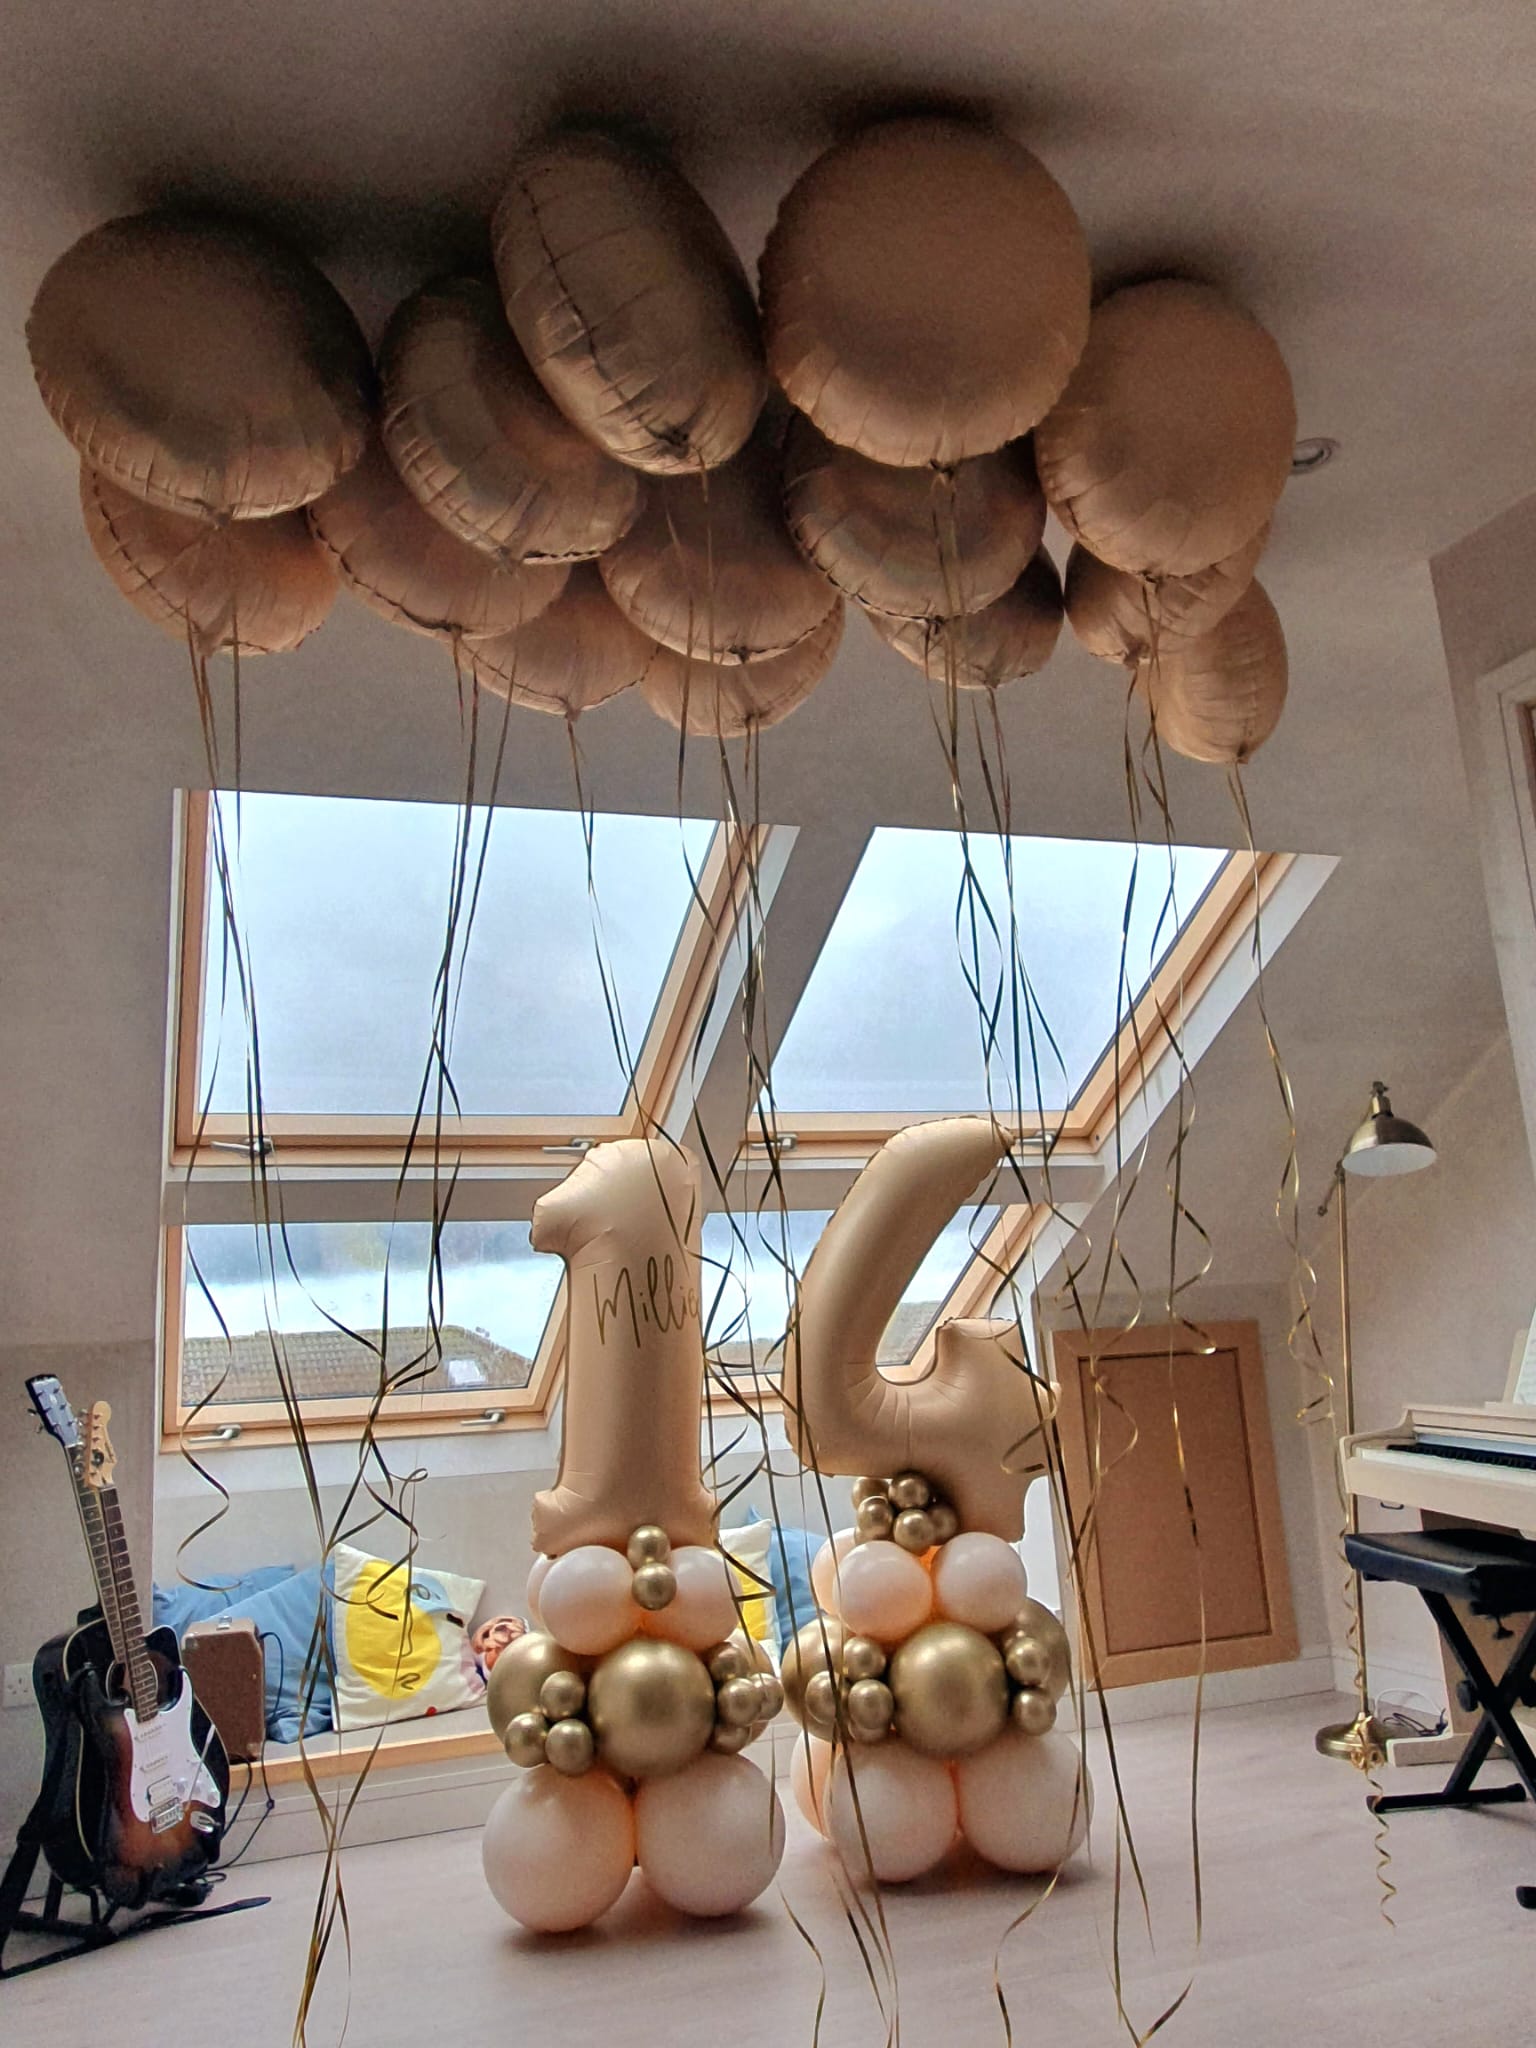 Nude balloon stacks with ceiling balloons